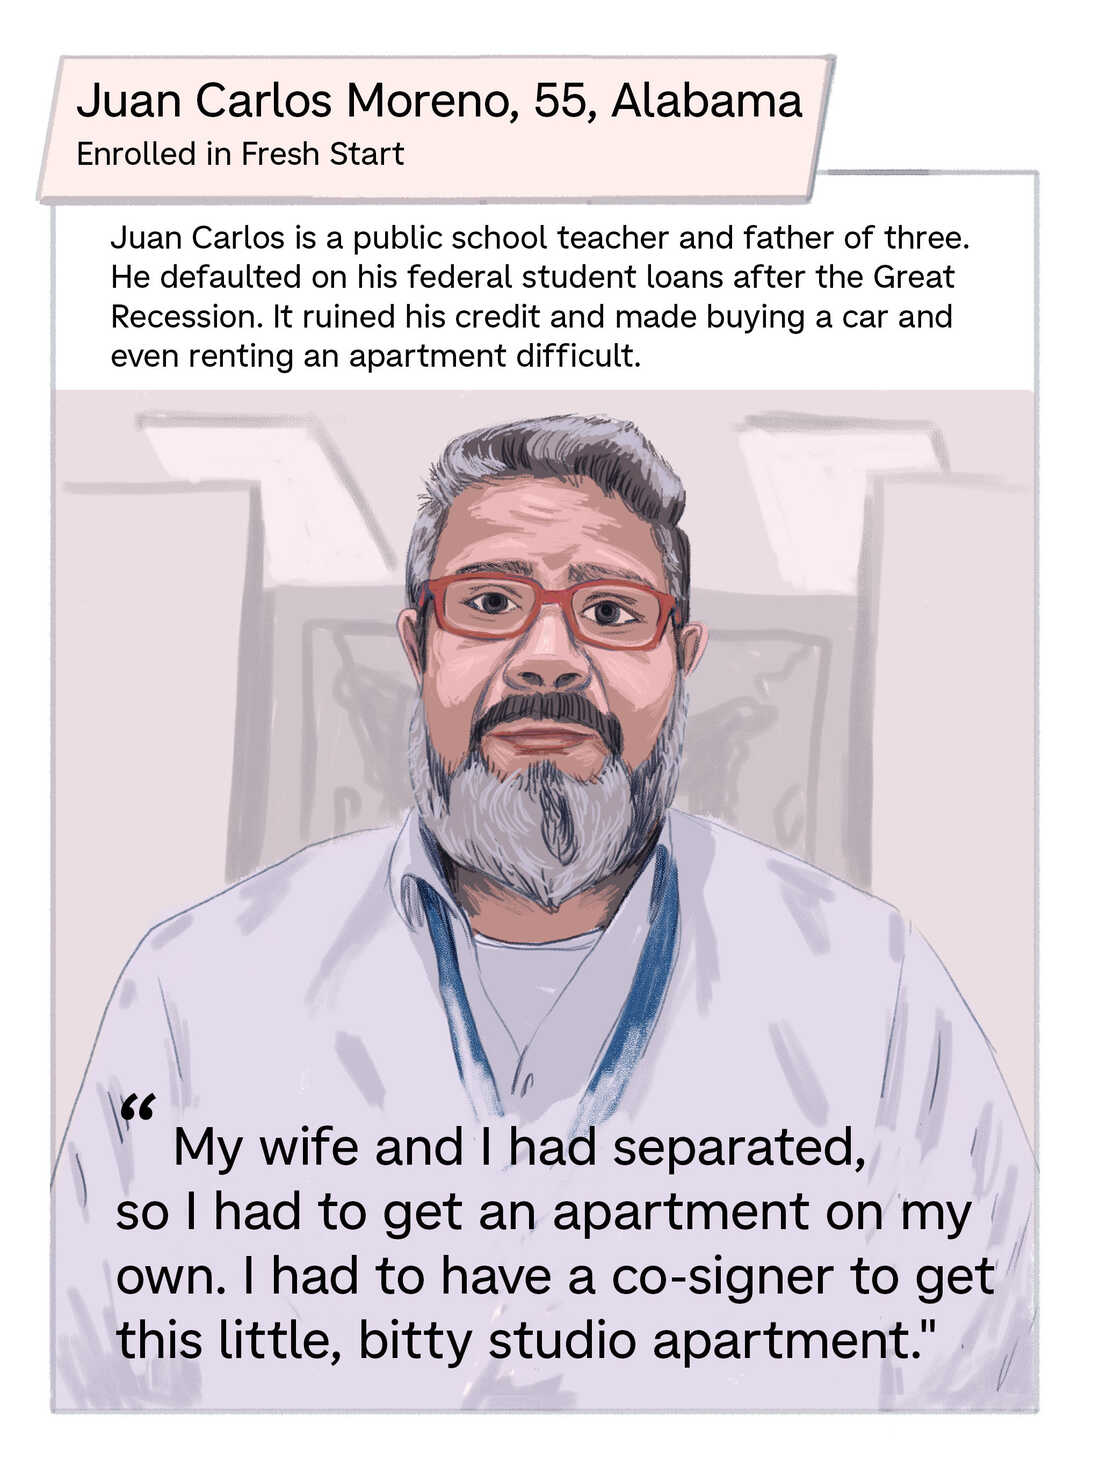 Juan Carlos is a public school teacher and father of three. He defaulted on his federal student loans after the Great Recession. It ruined his credit, and made buying a car and even renting an apartment difficult. Quote:  "My wife and I had separated, so I had to get an apartment on my own. And I had to have a co-signer to get this little, bitty studio apartment."